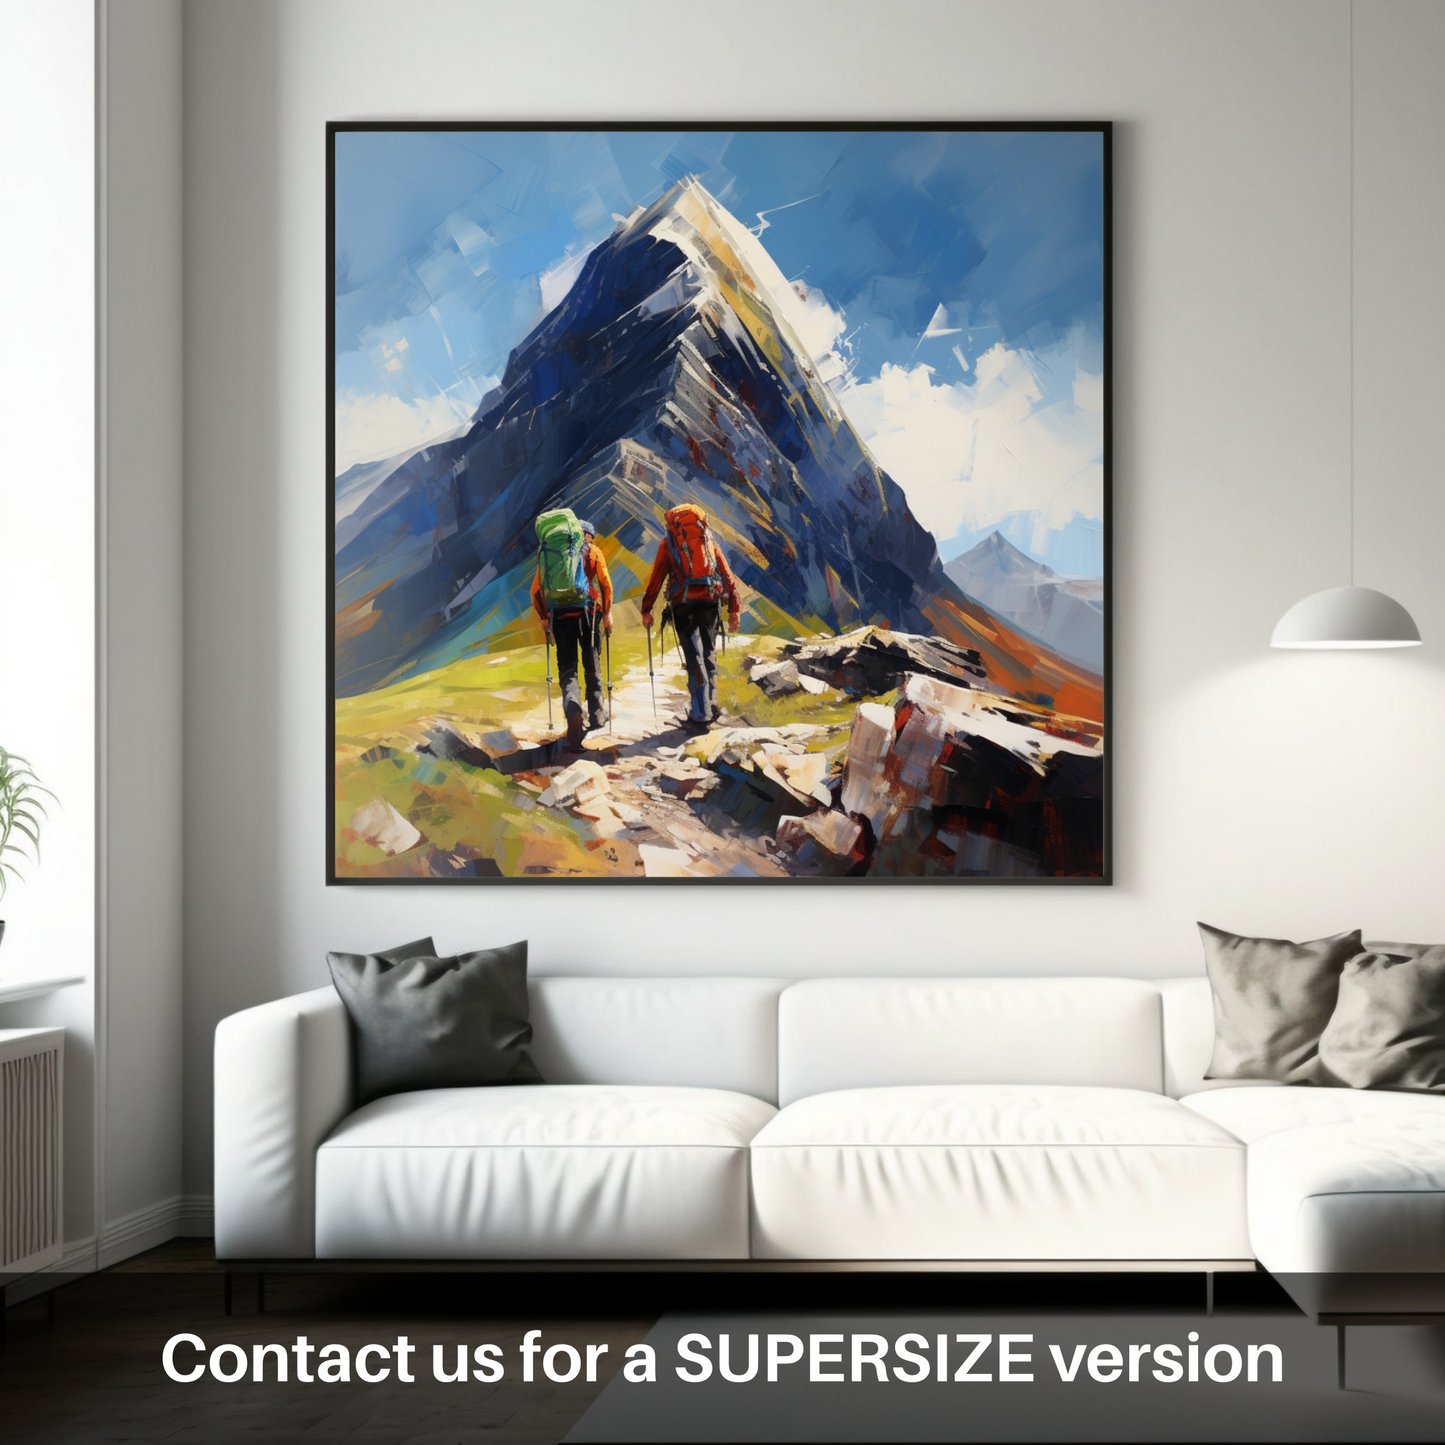 Huge supersize print of Hikers at Buachaille summit in Glencoe